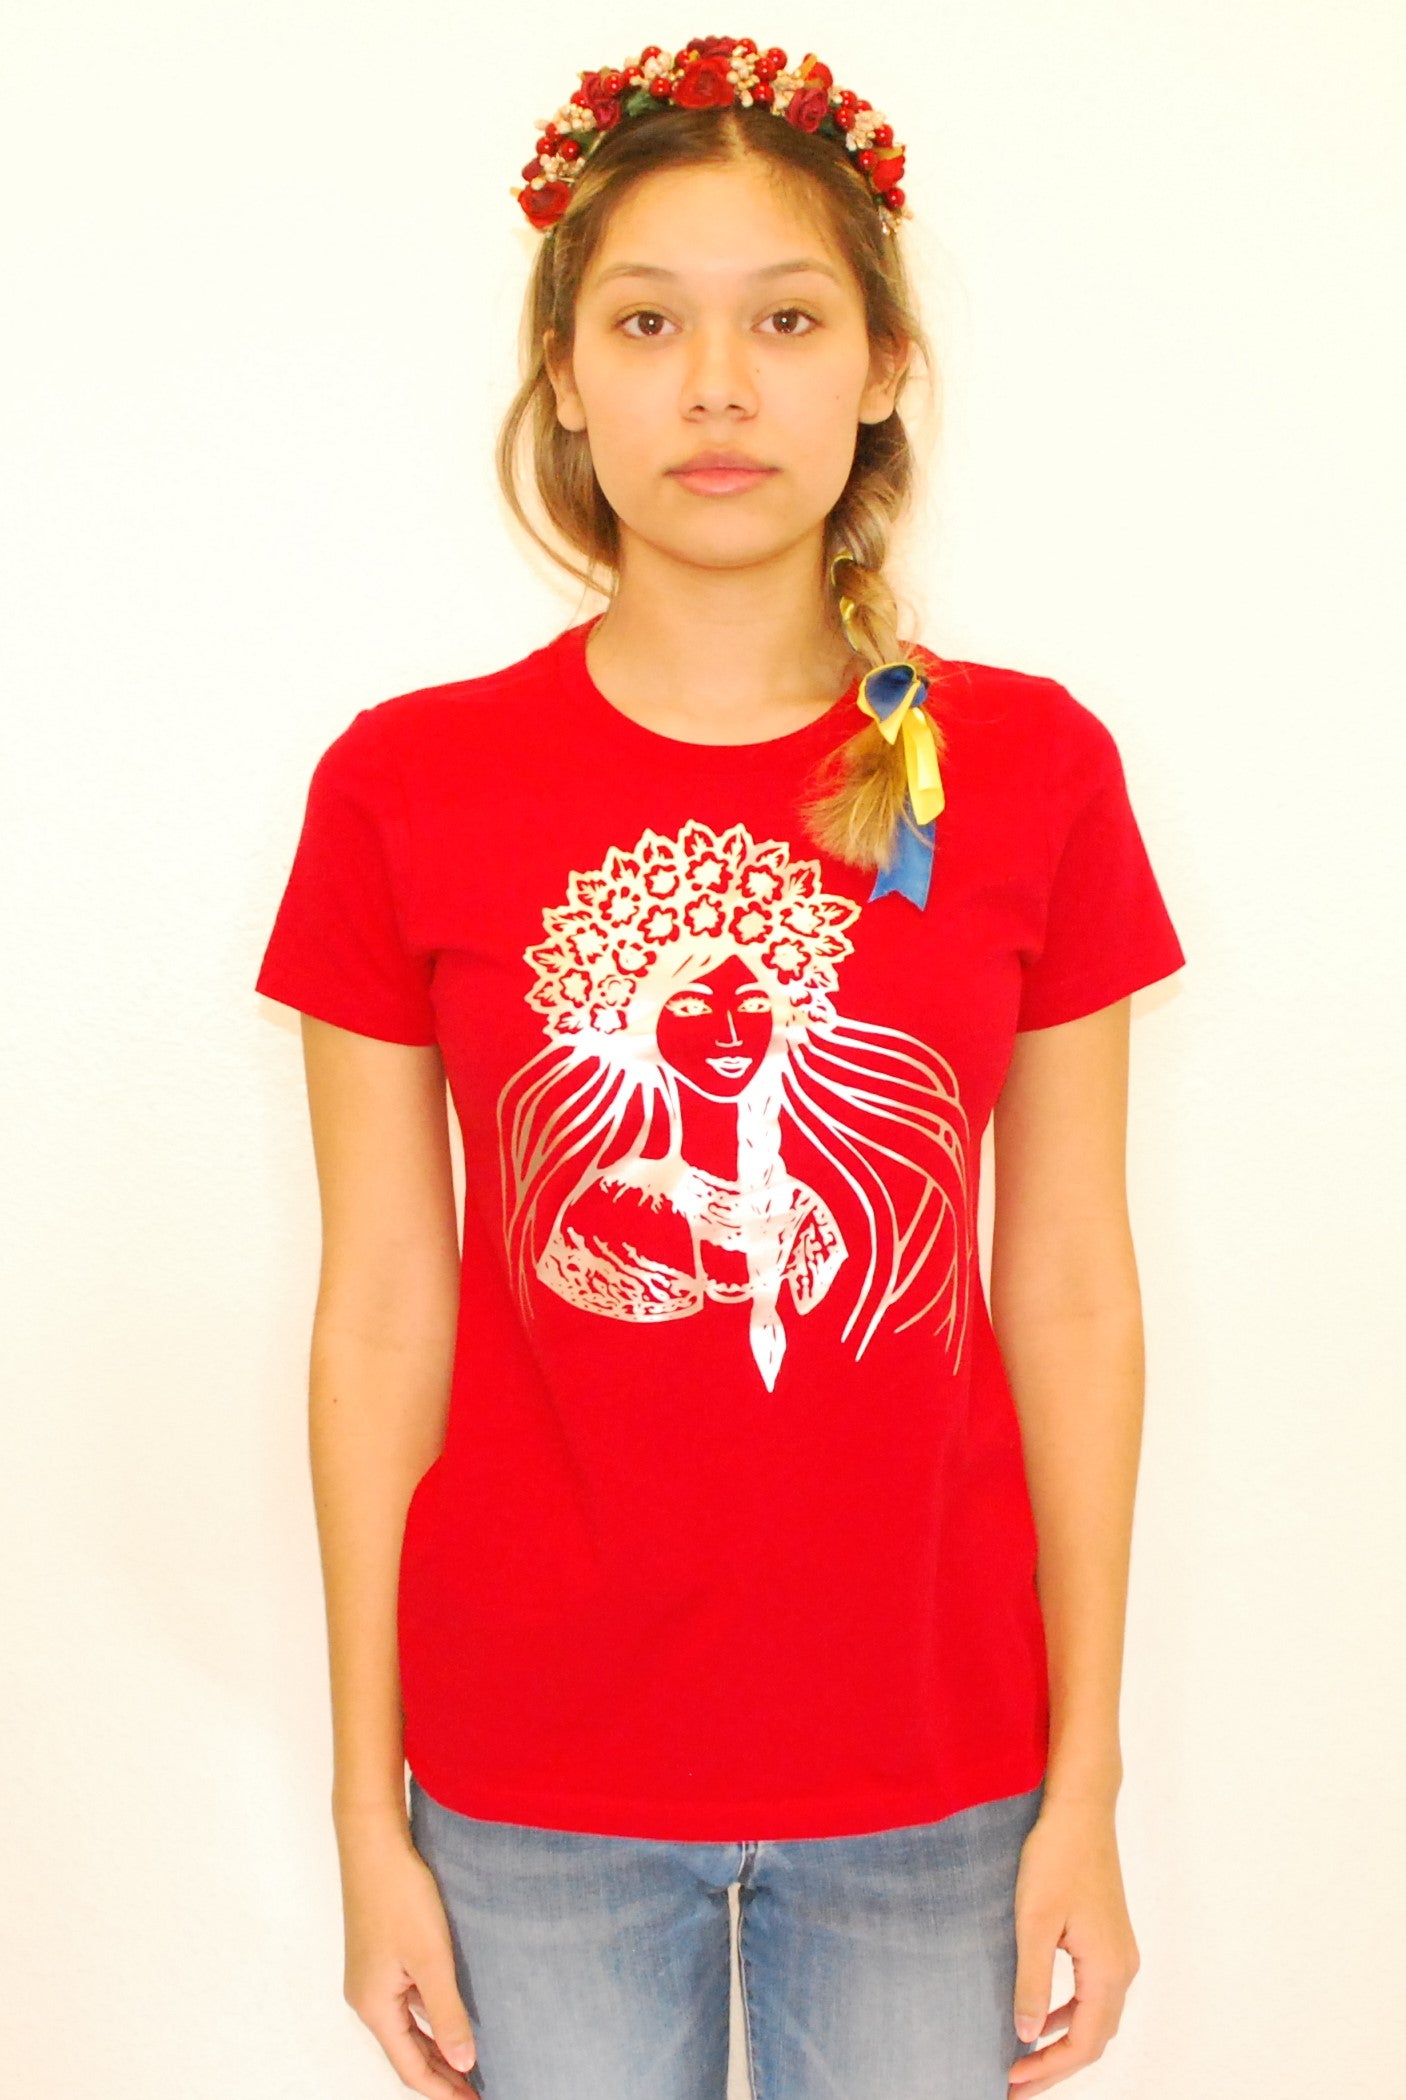 FEMALE FIT T-SHIRT "TRIDENT" RED